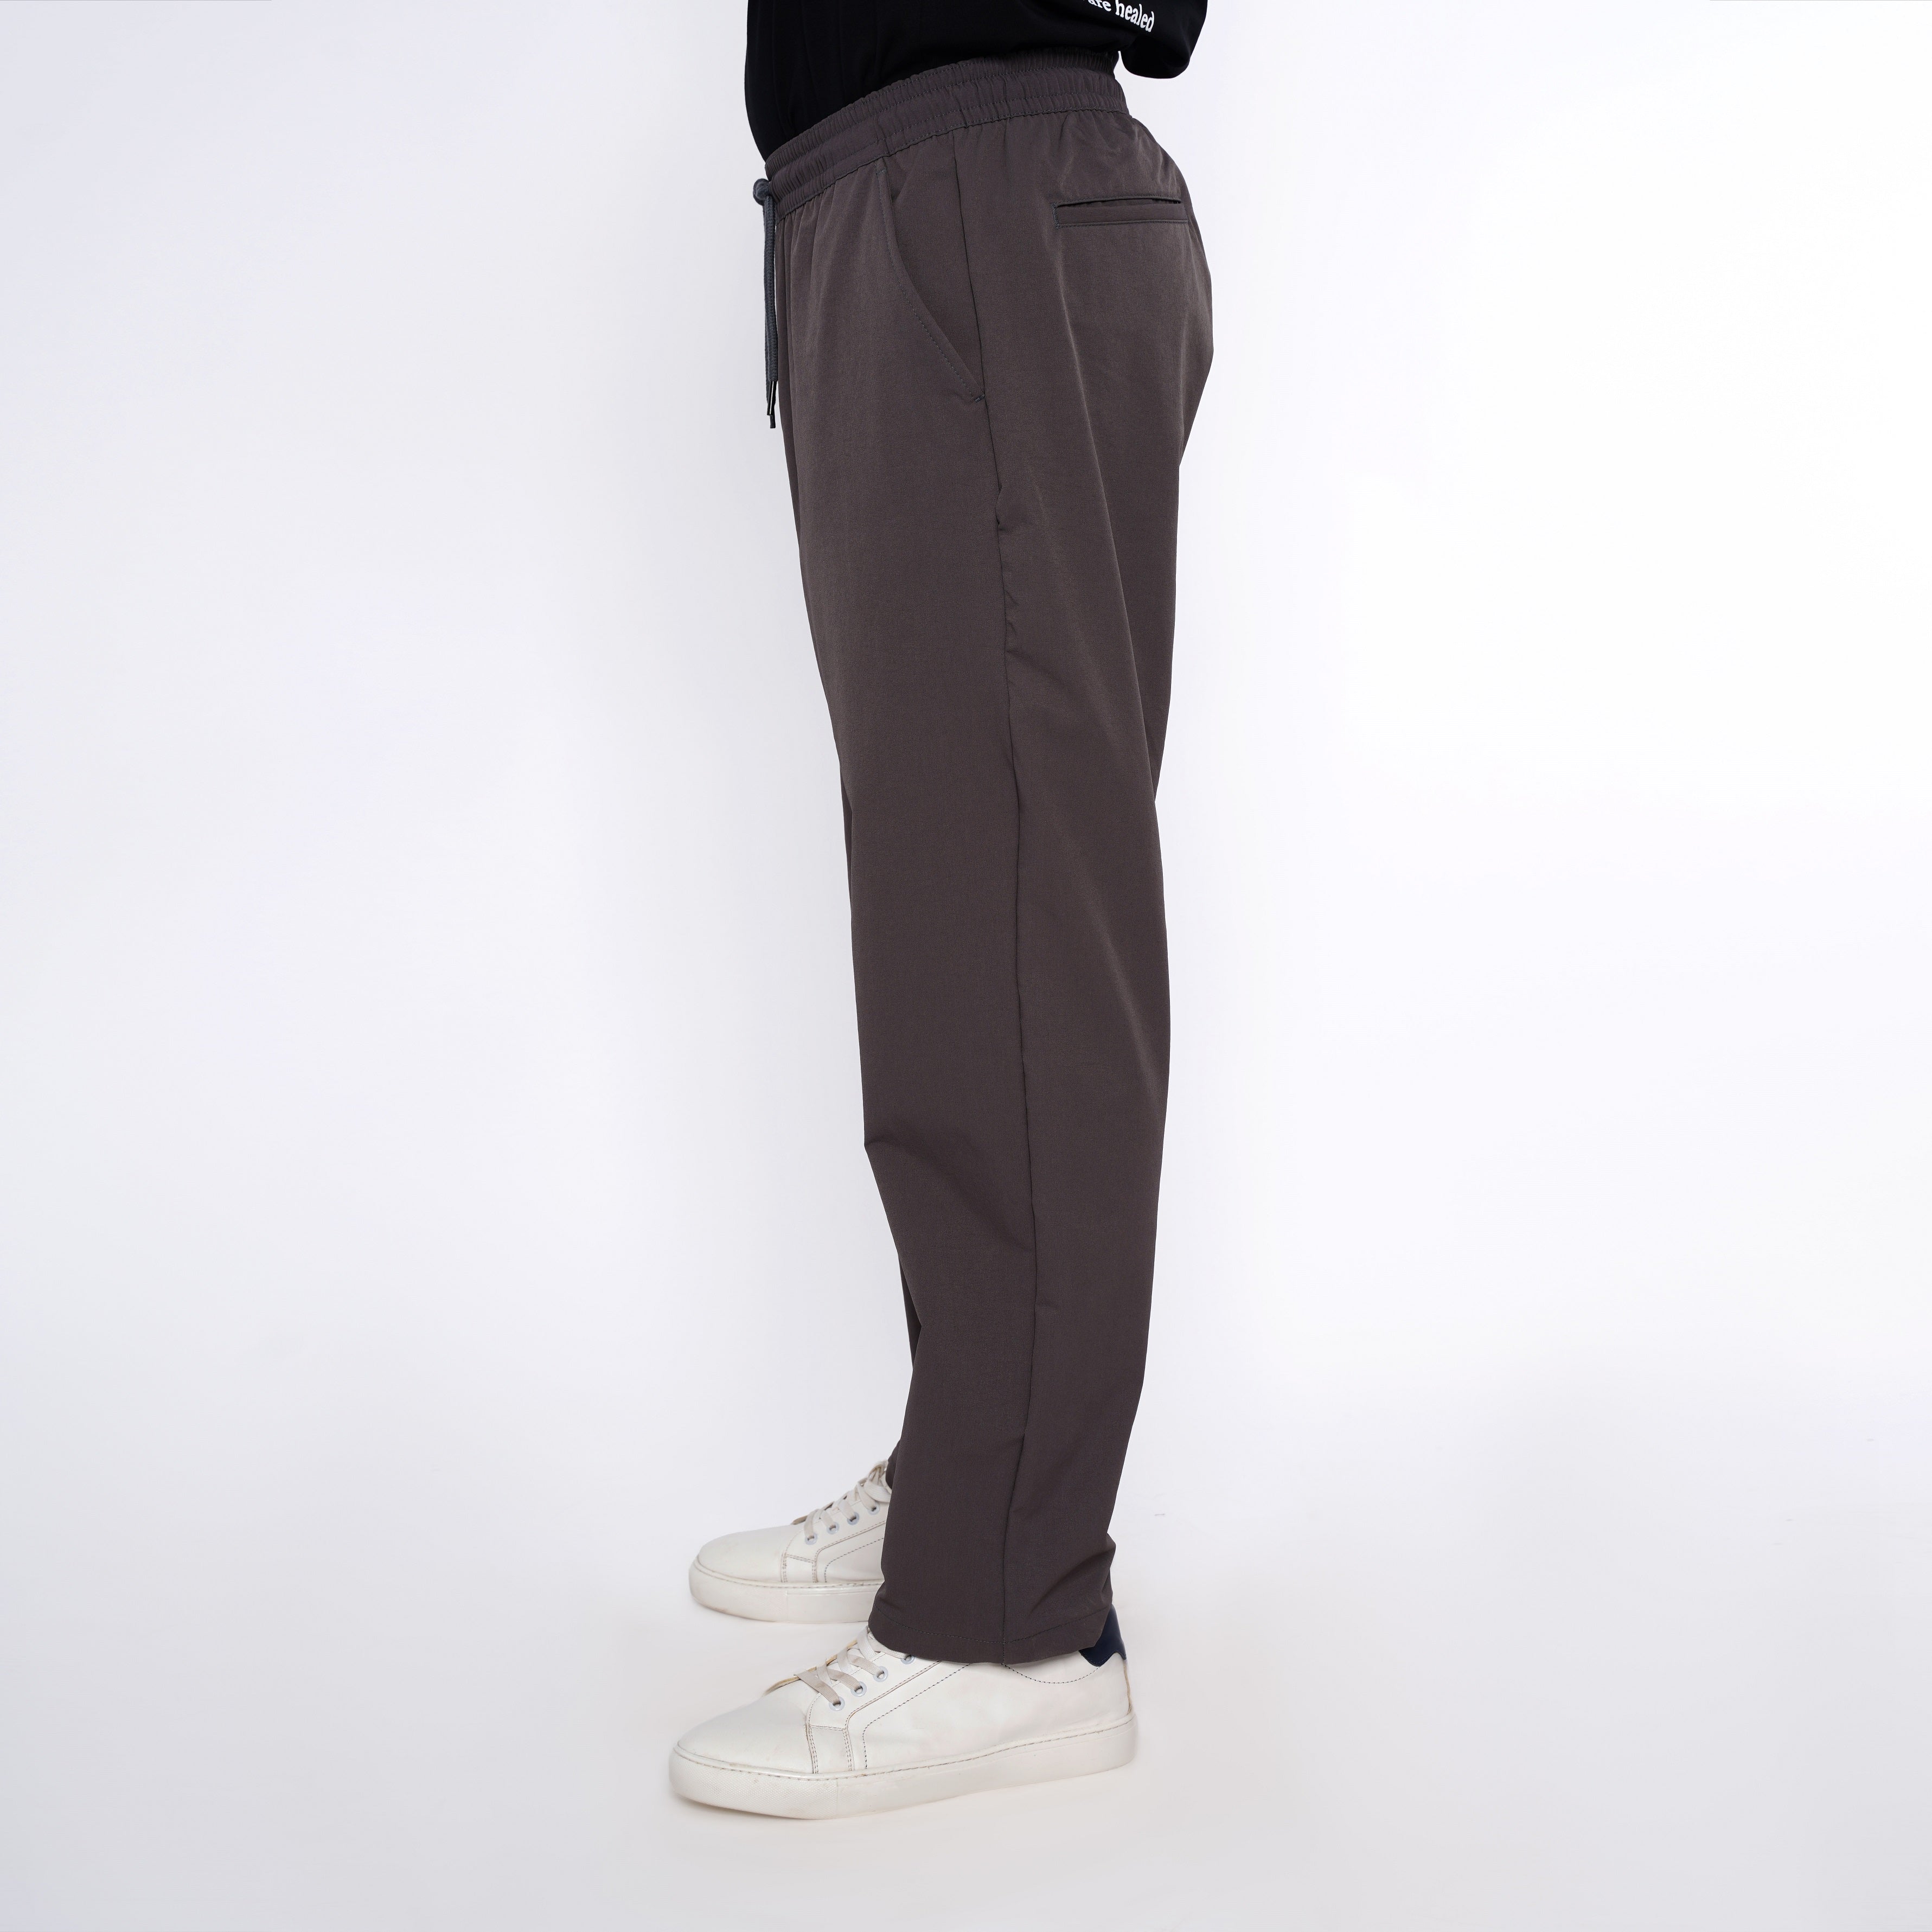 M24NT906-Sporty Sweatpants With drawstring